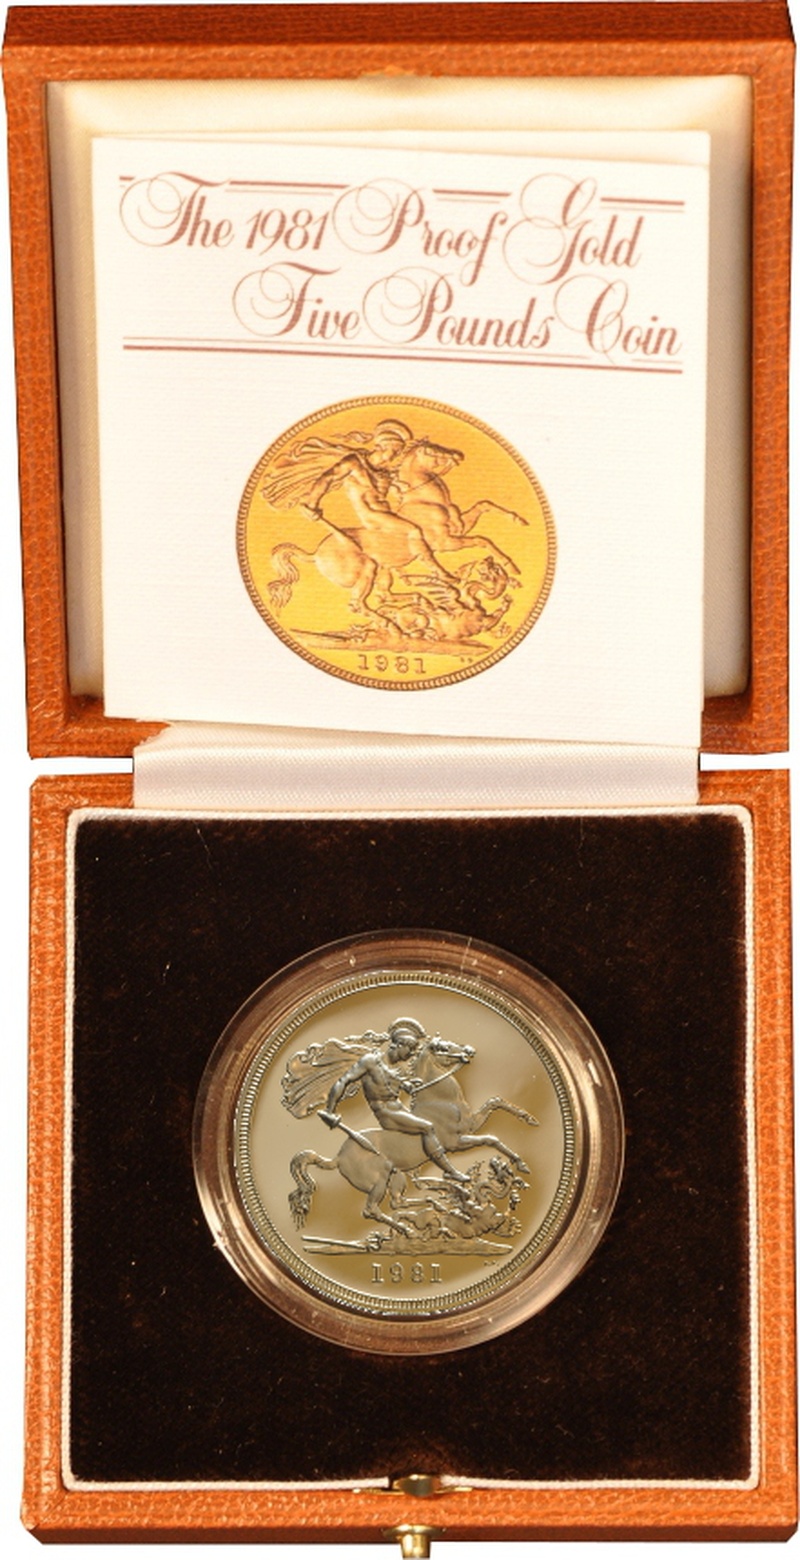 1981 - Gold Five Pound Proof Coin